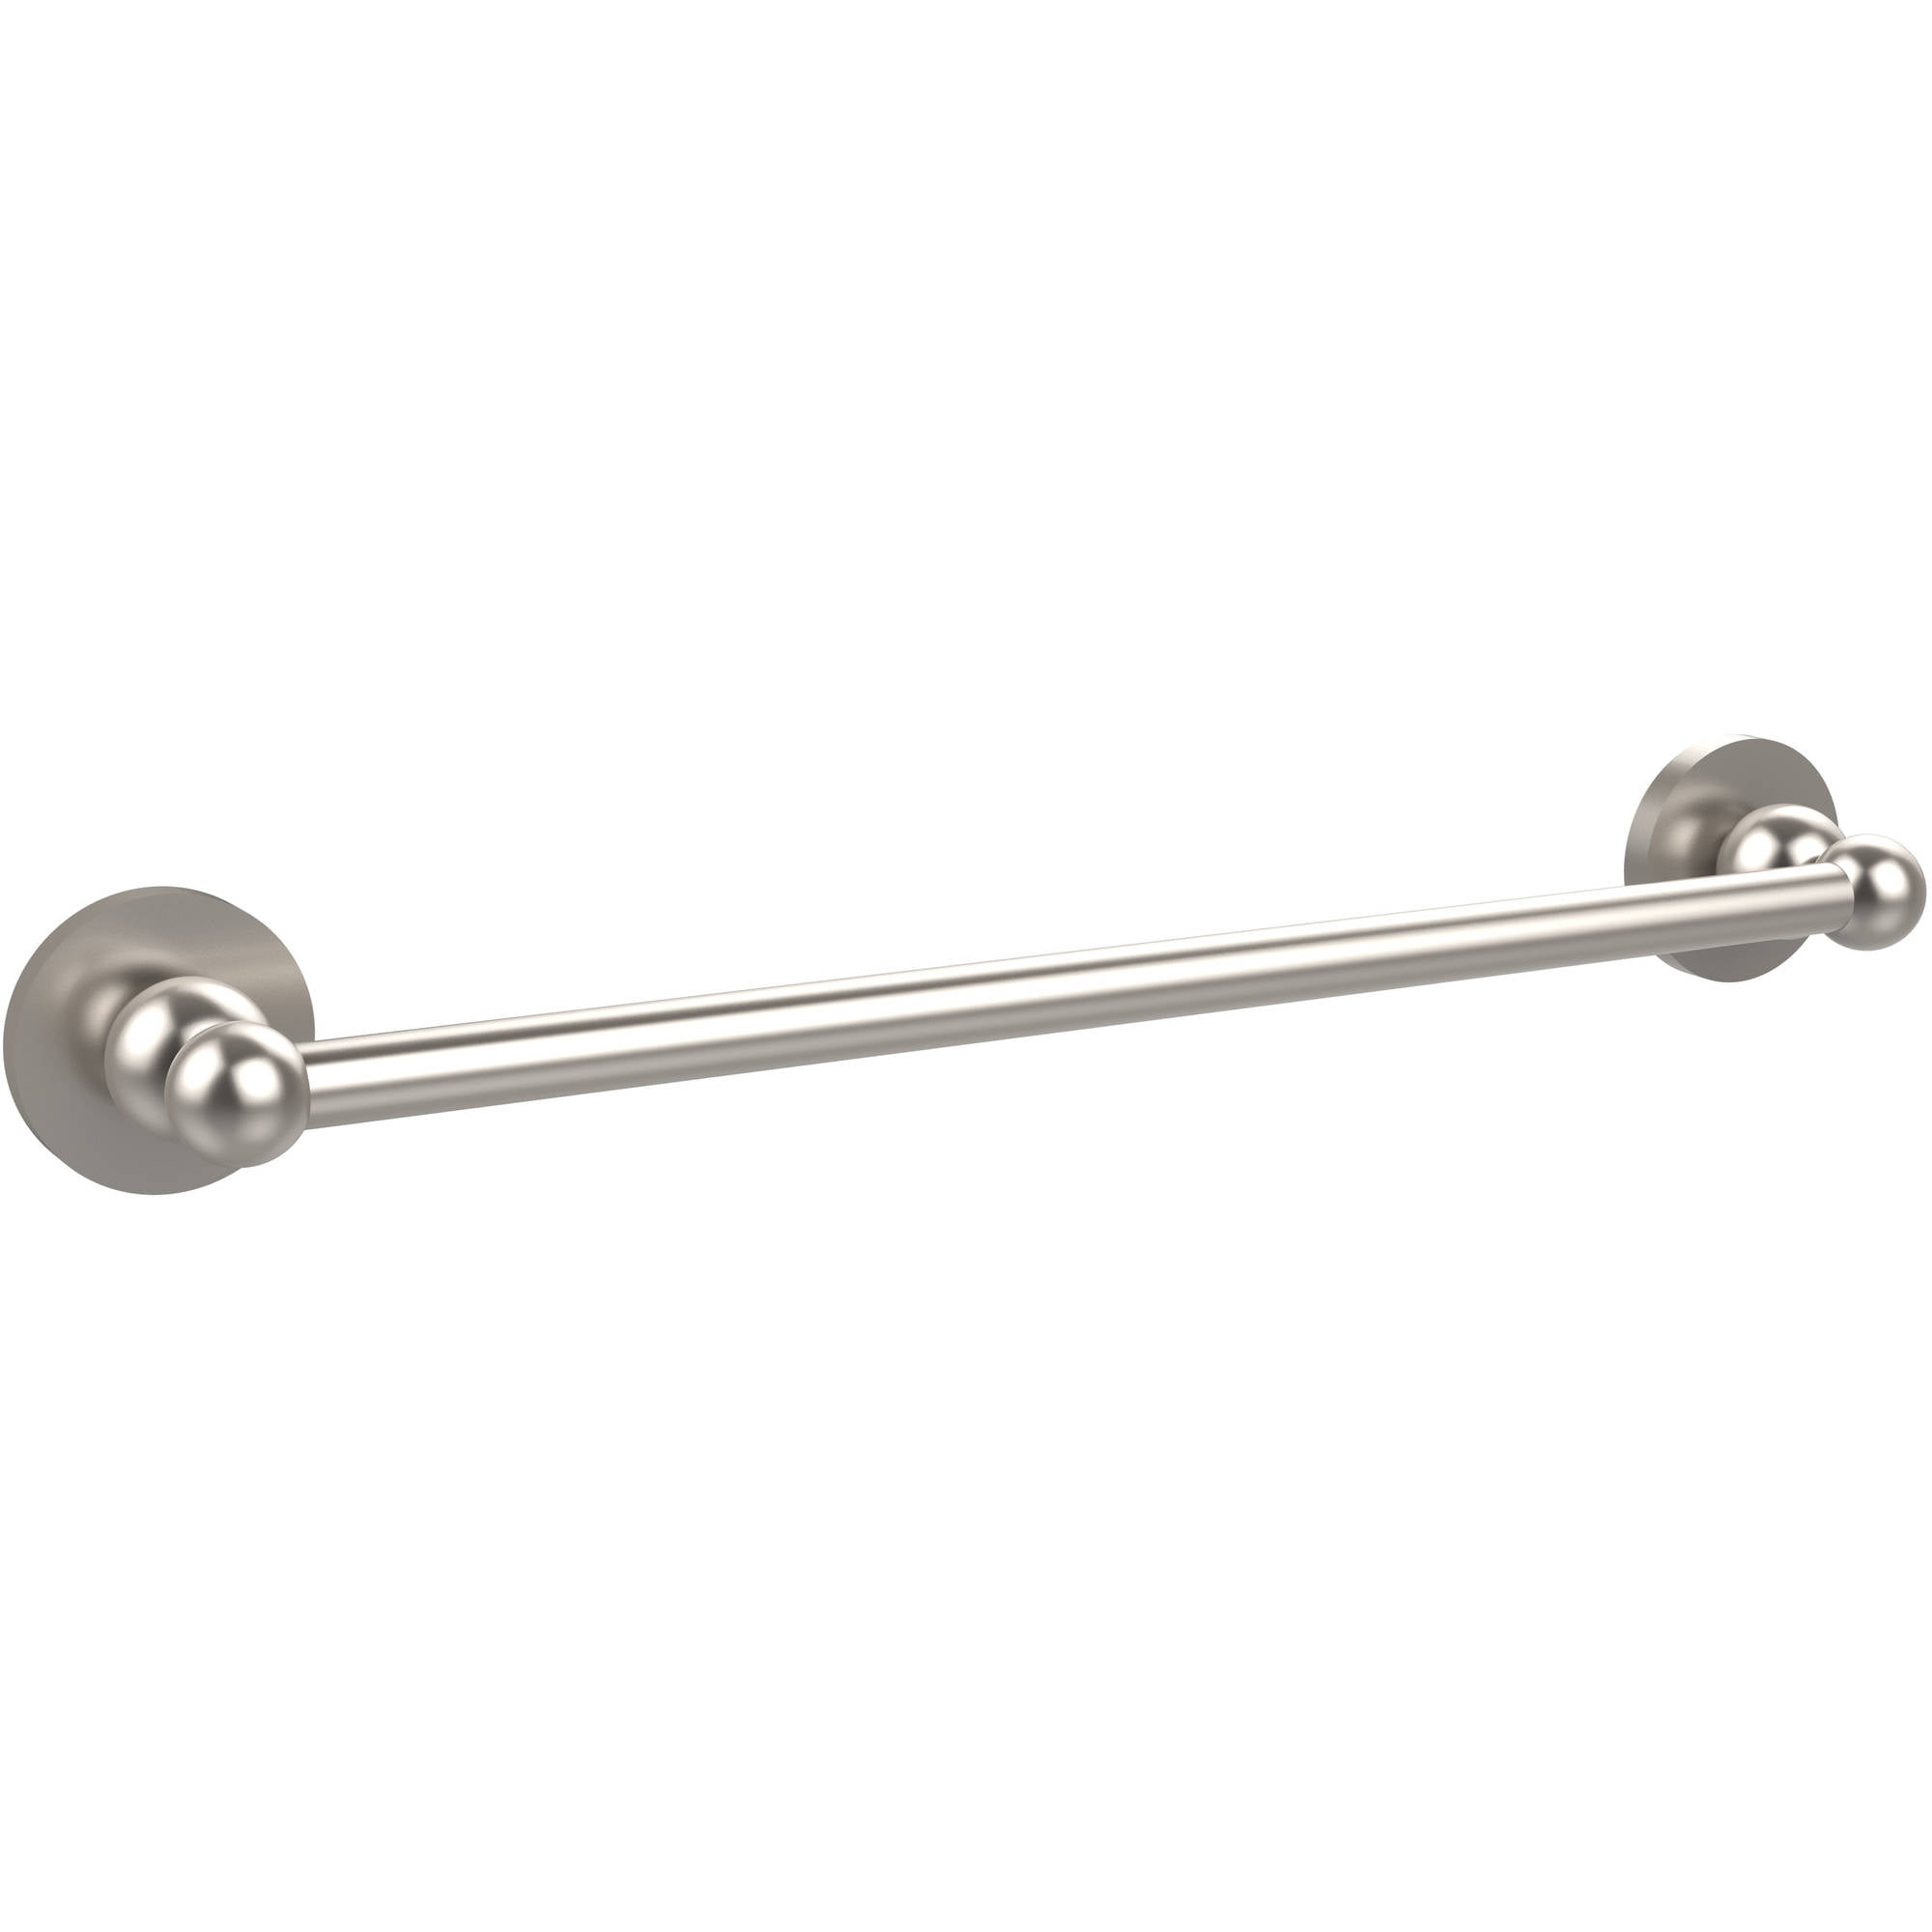 Allied Brass FR-1/16GTB-PNI Fresno Collection 16 Inch Glass Shelf with Vanity Rail and Integrated Towel Bar Polished Nickel 